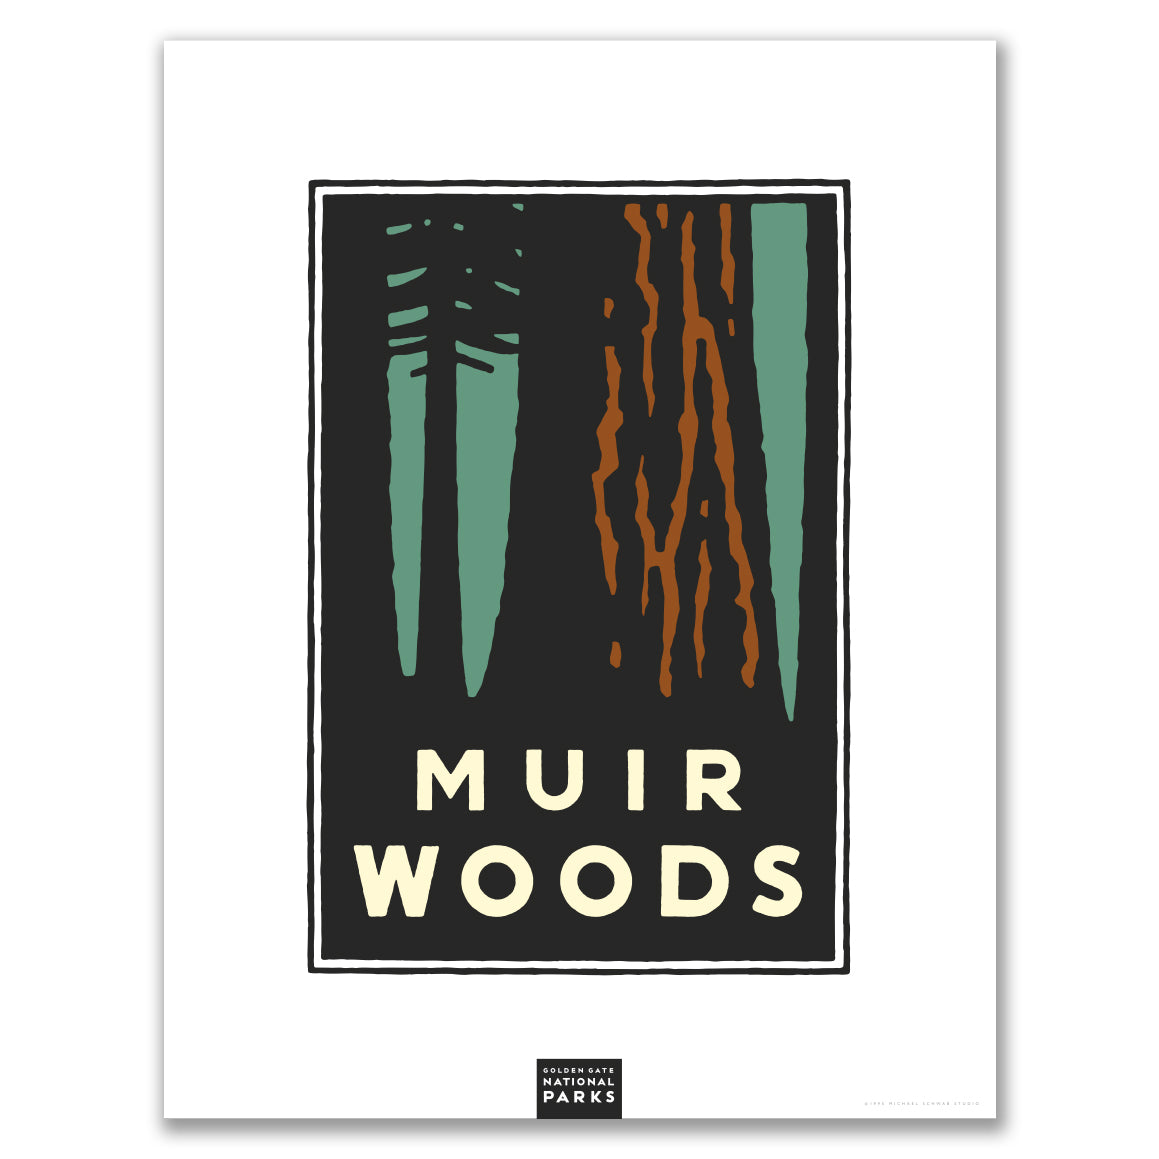 Multicolor Muir Woods giclee poster print, with art by Michael Schwab